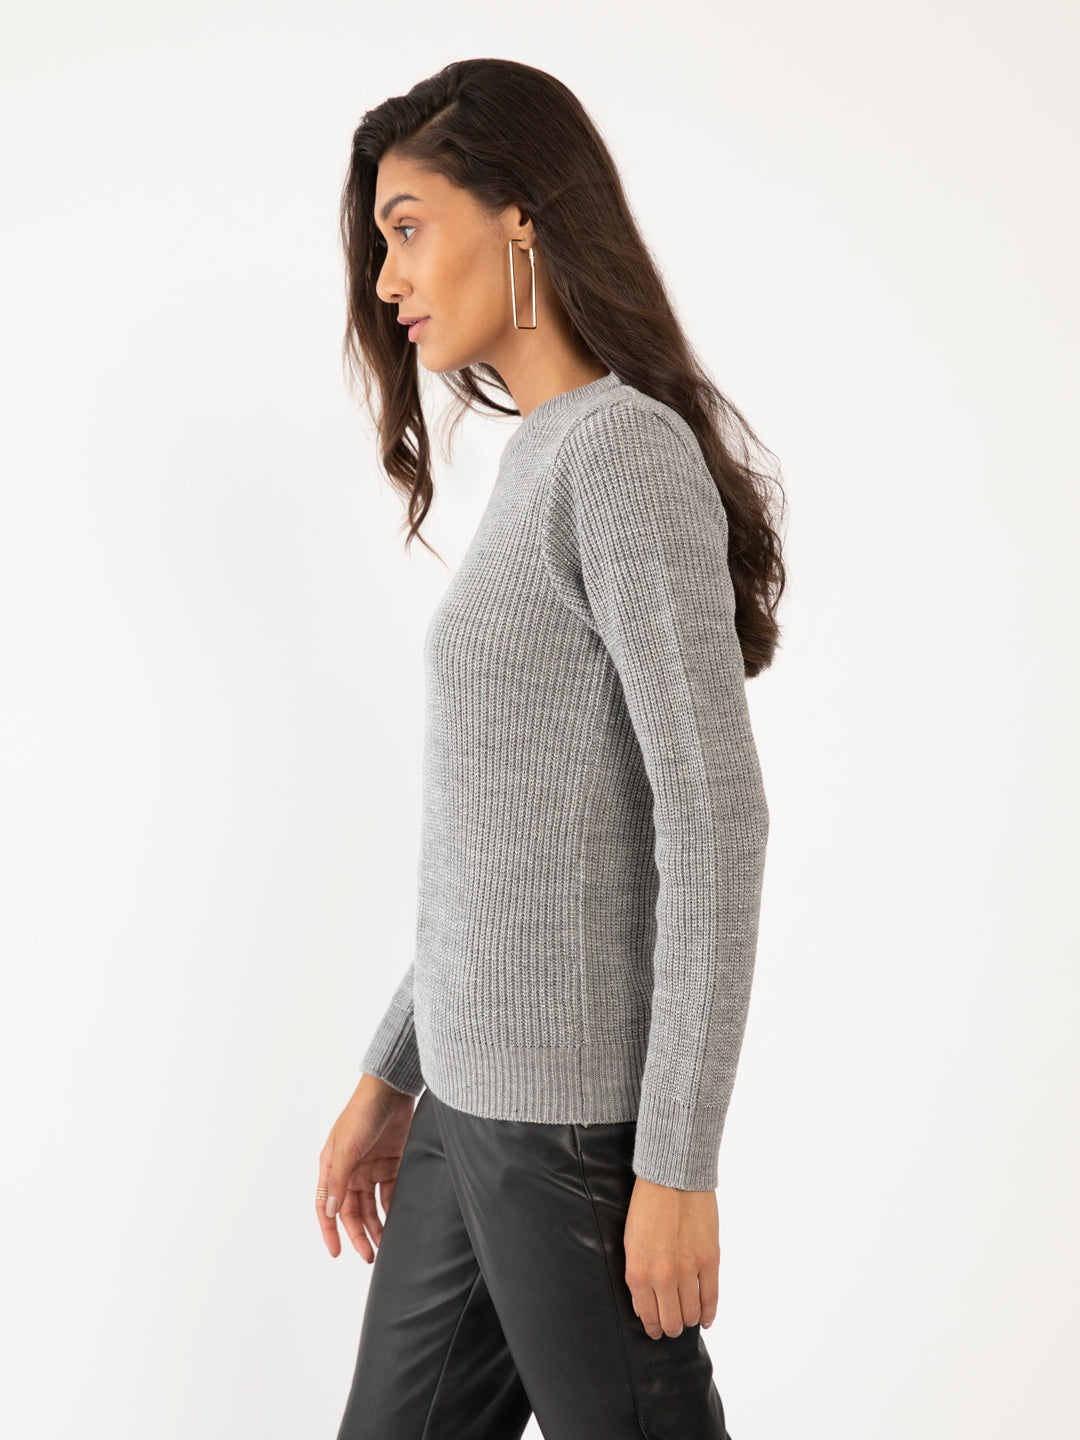 Grey Textured Sweater For Women